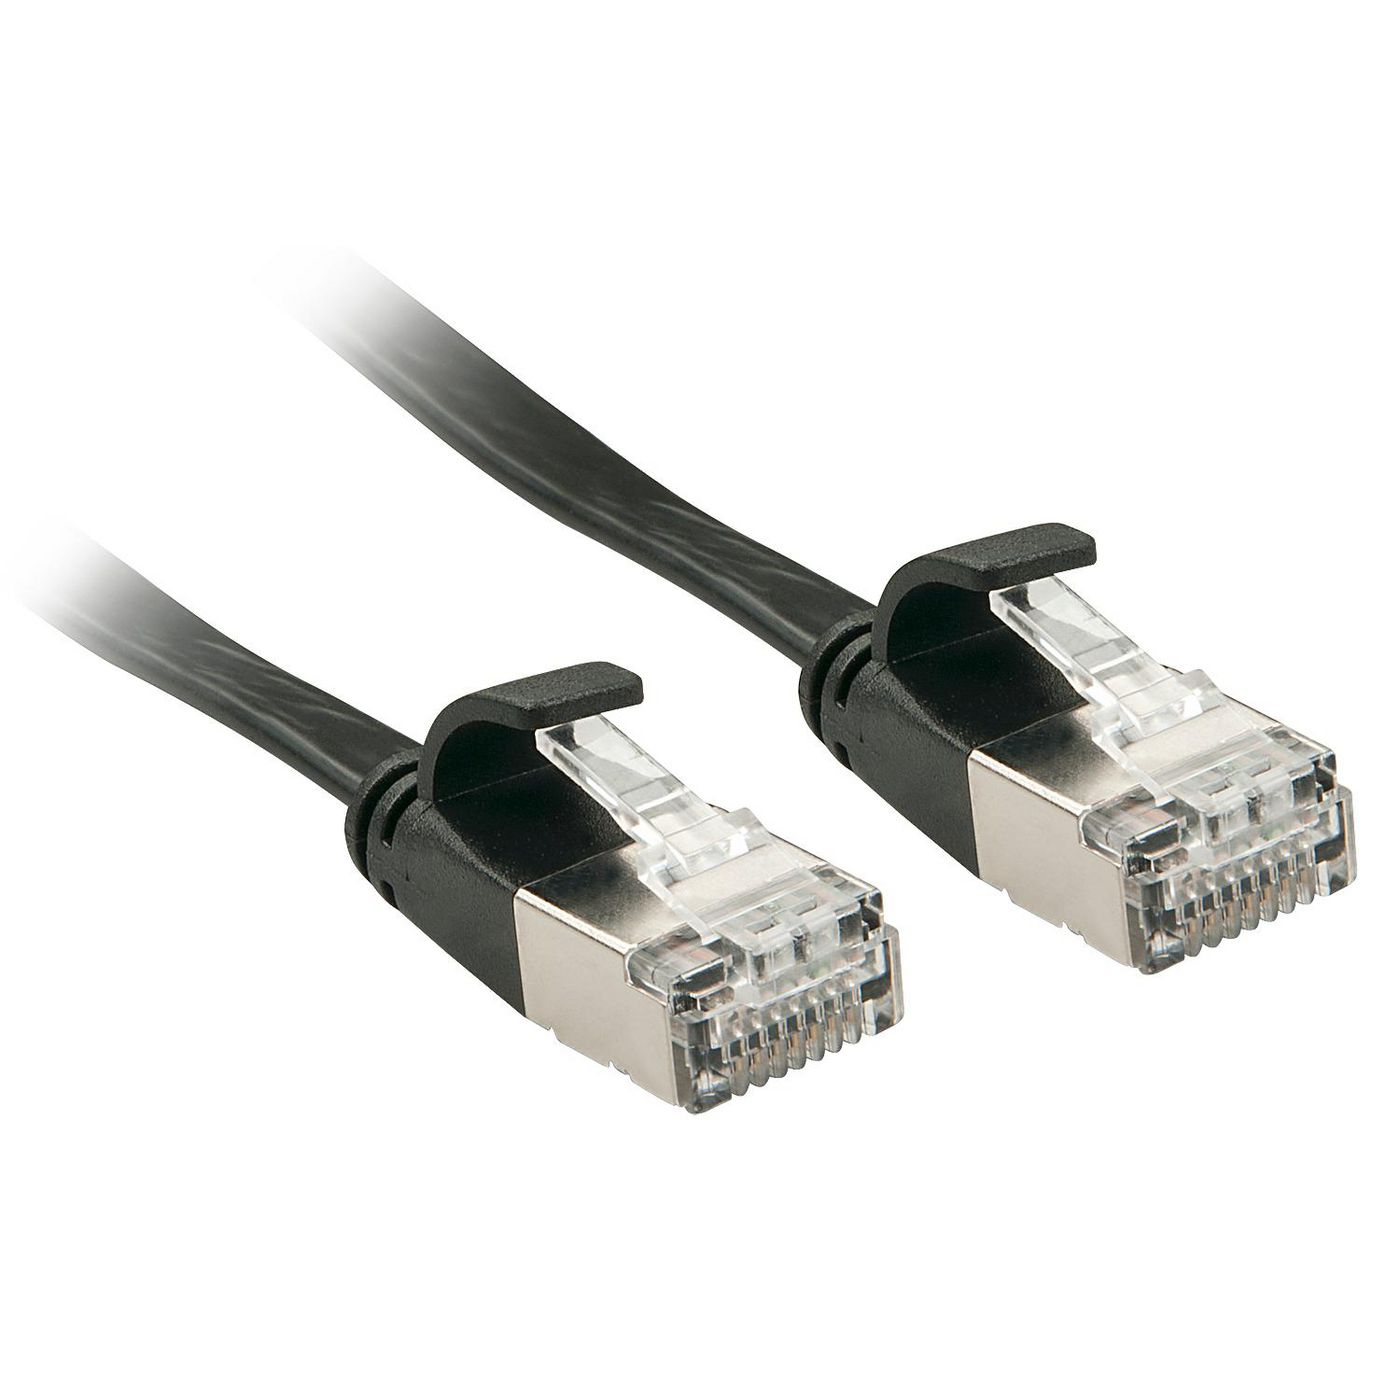 Lindy 47484 W128370978 Networking Cable Black 5 M 